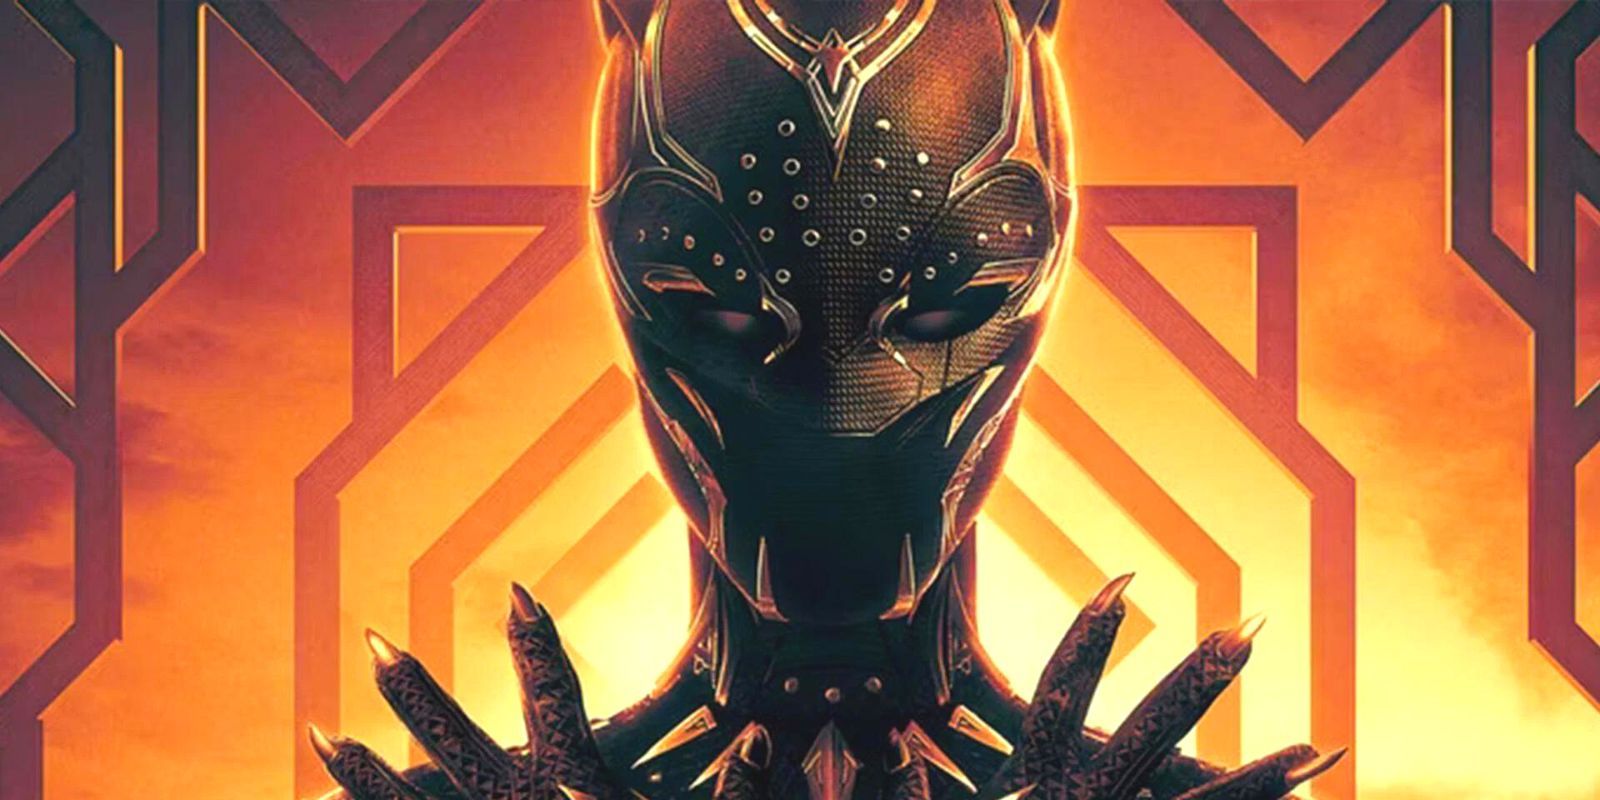 Shuri's Black Panther costume, displaying her claws